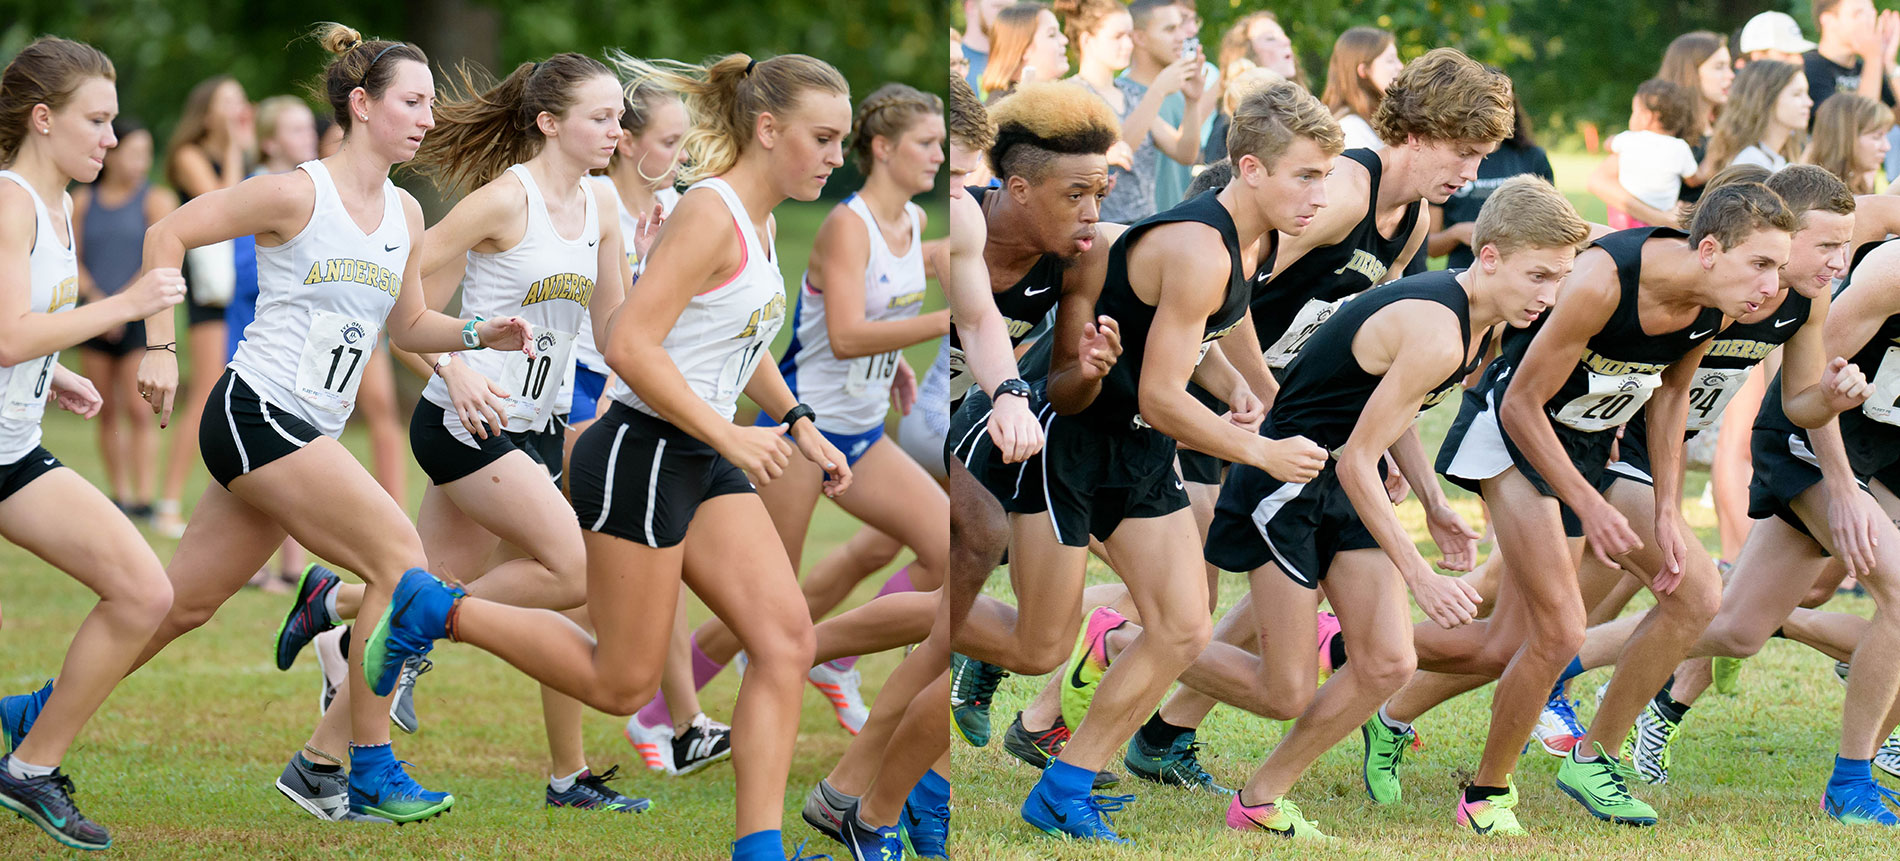 Cross Country to Make First-Ever Appearance at Piedmont College Invitational